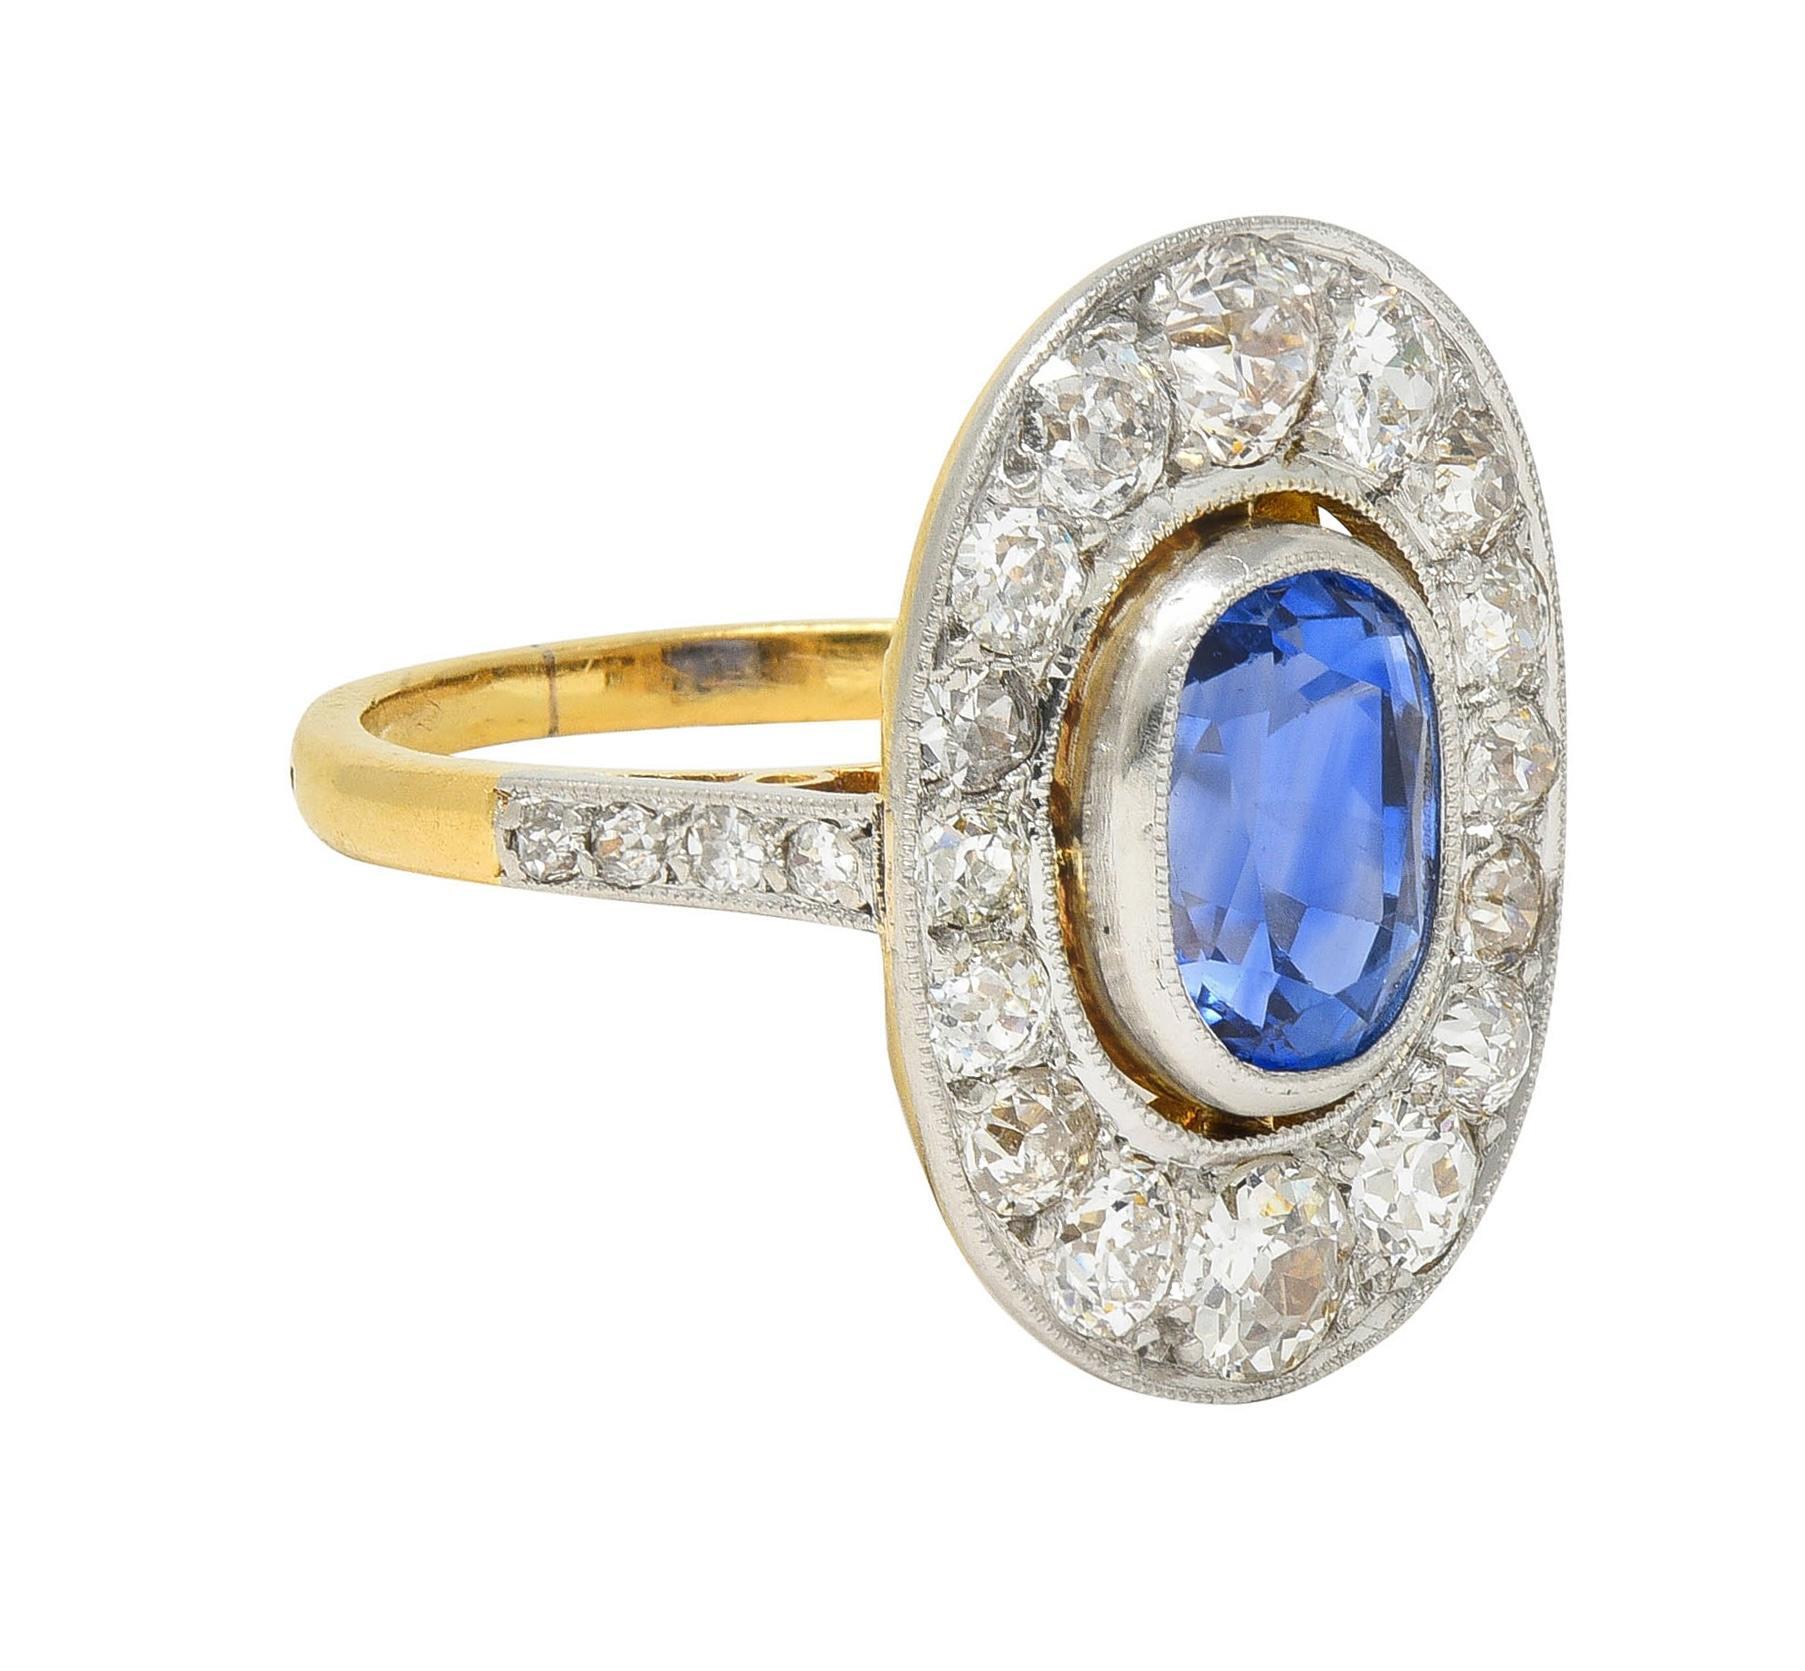 Centering an elongated cushion cut sapphire weighing 2.64 carats total - transparent medium blue
Natural Sri Lanka in origin and displaying no indications of heat treatment
Set in a platinum-topped milgrain bezel with a pierced floating halo